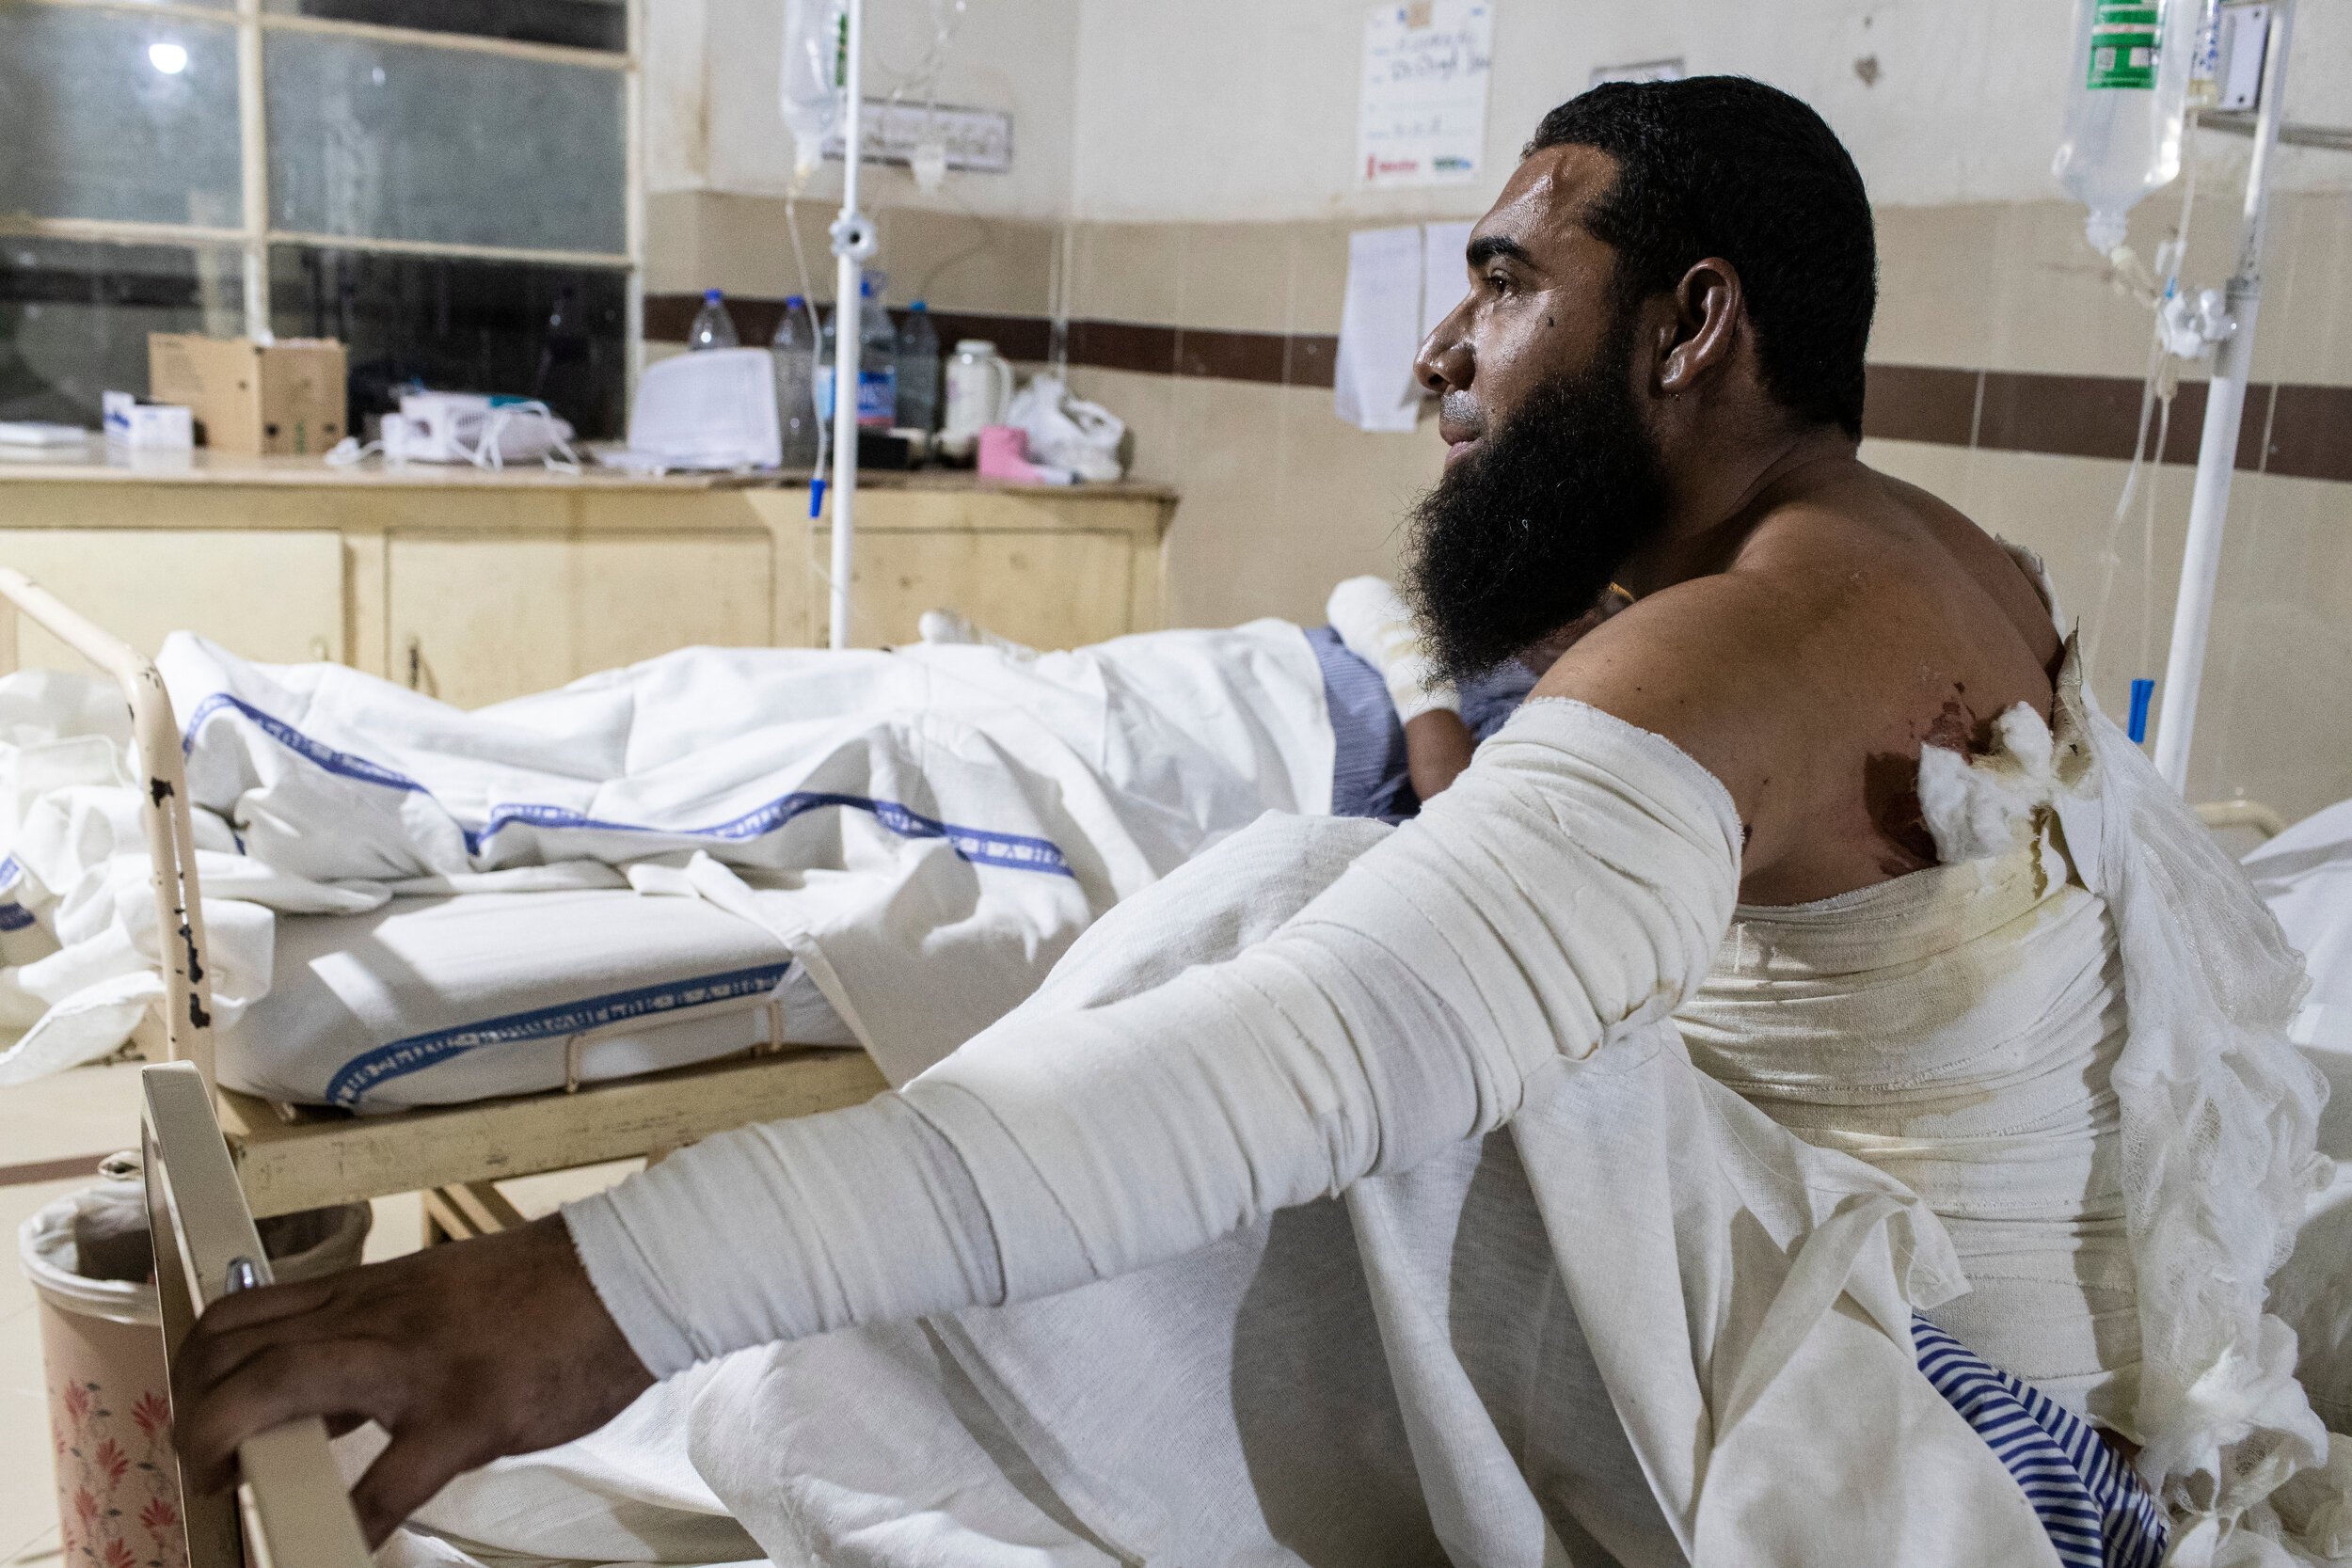  Survivor Abdul Mohmin David Ahmed at Bahawal Victoria Hospital in Bahawalpur, Pakistan on Nov 1, 2019, a day after one of the deadliest train accidents in Pakistan’s history. 